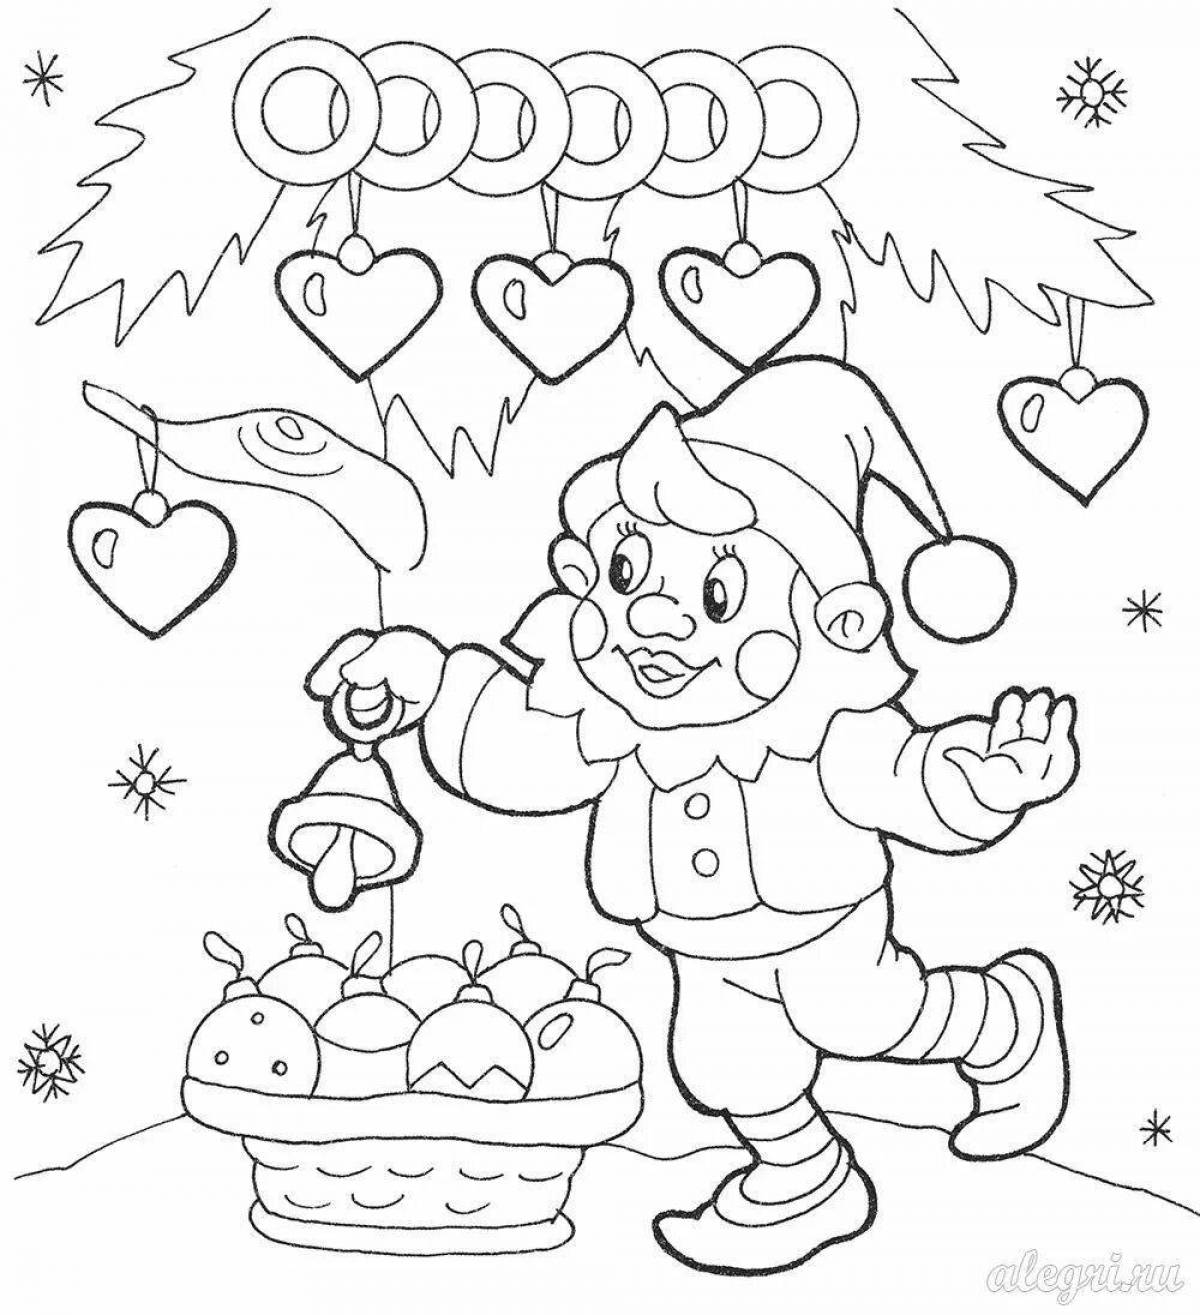 Color frenzy new year 9 years coloring page